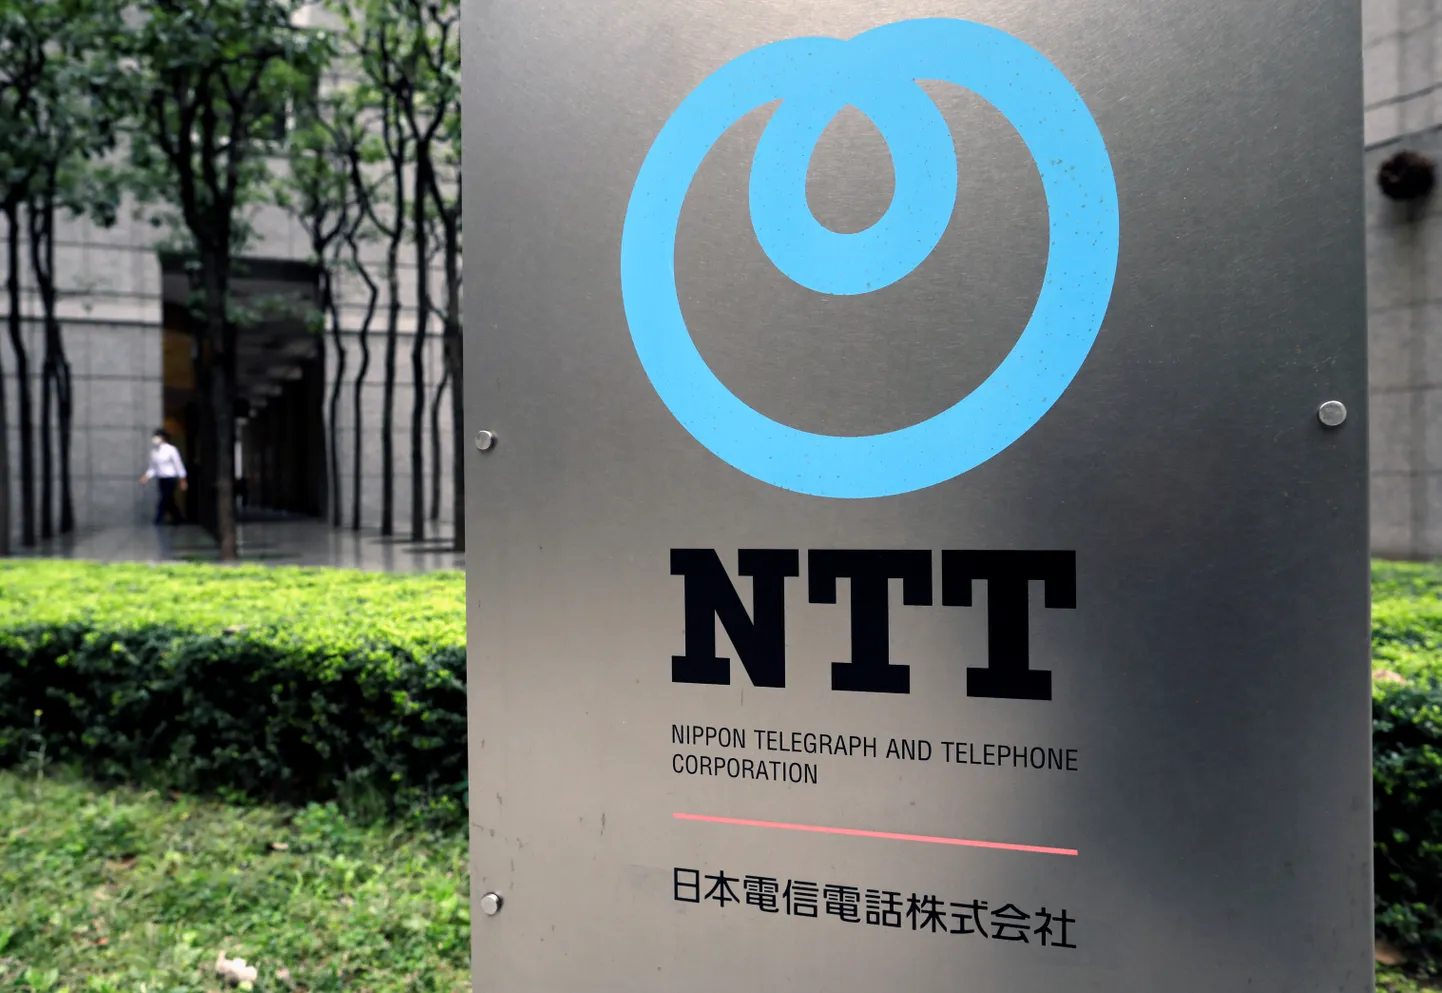 The logo of NTT (Nippon Telegraph and Telephone Corporation) is displayed at the company office in Tokyo.